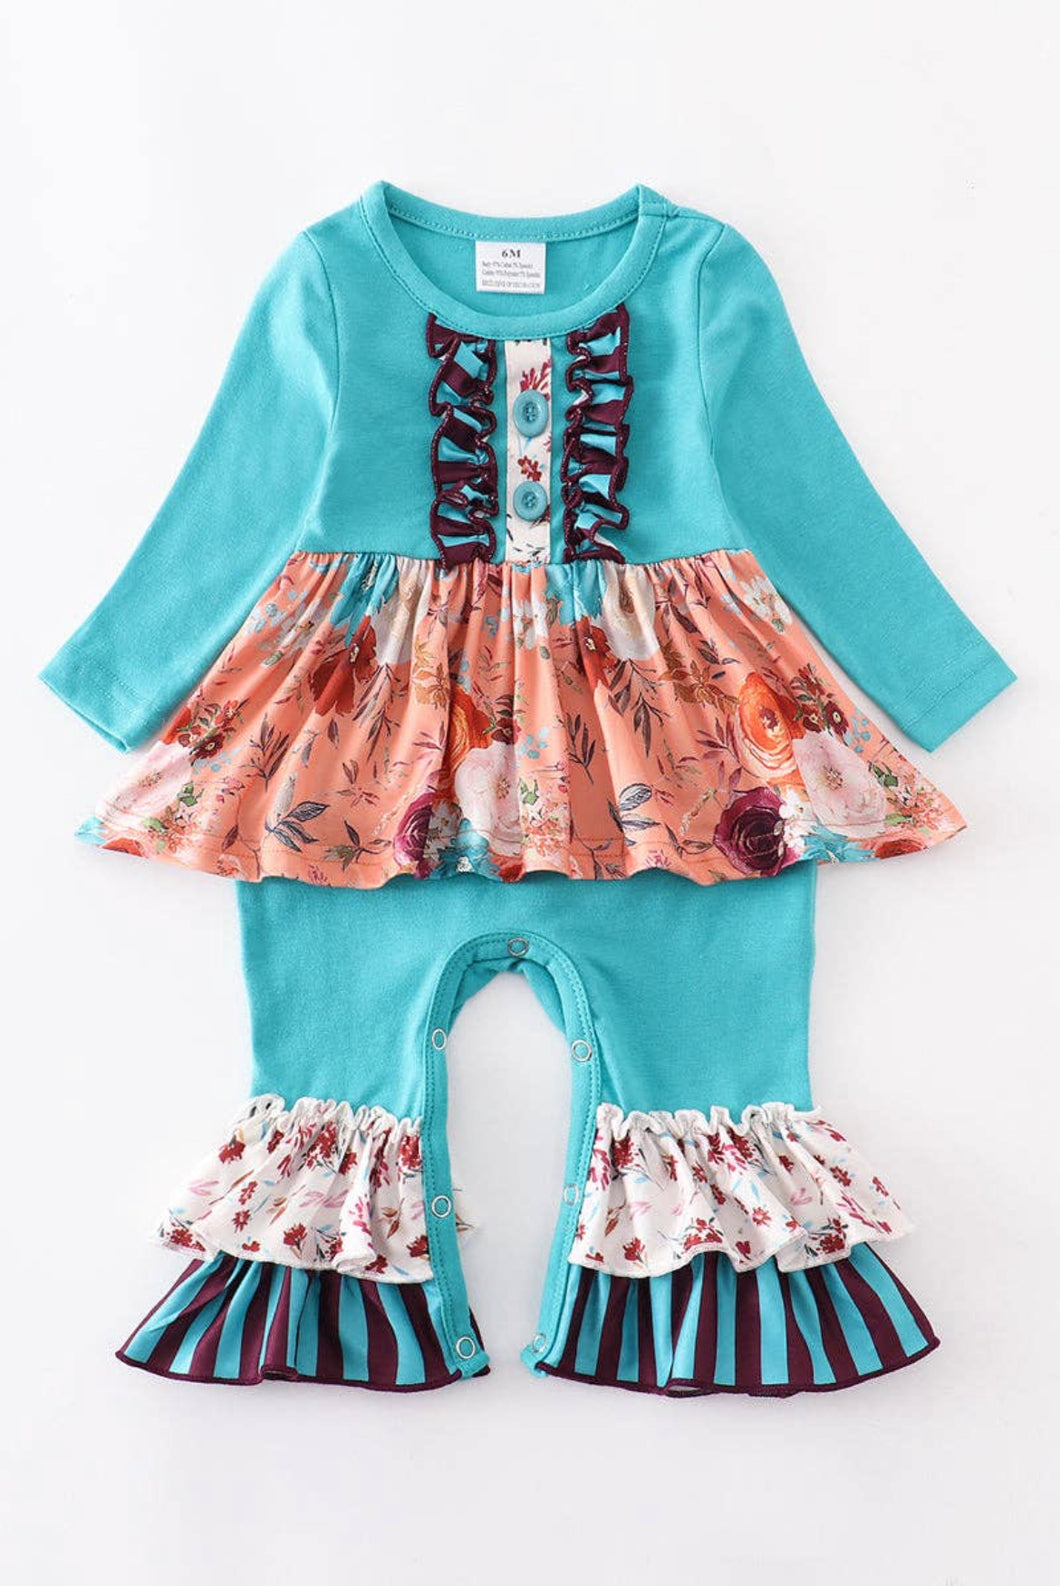 Baby Girl Teal Floral Ruffle Romper